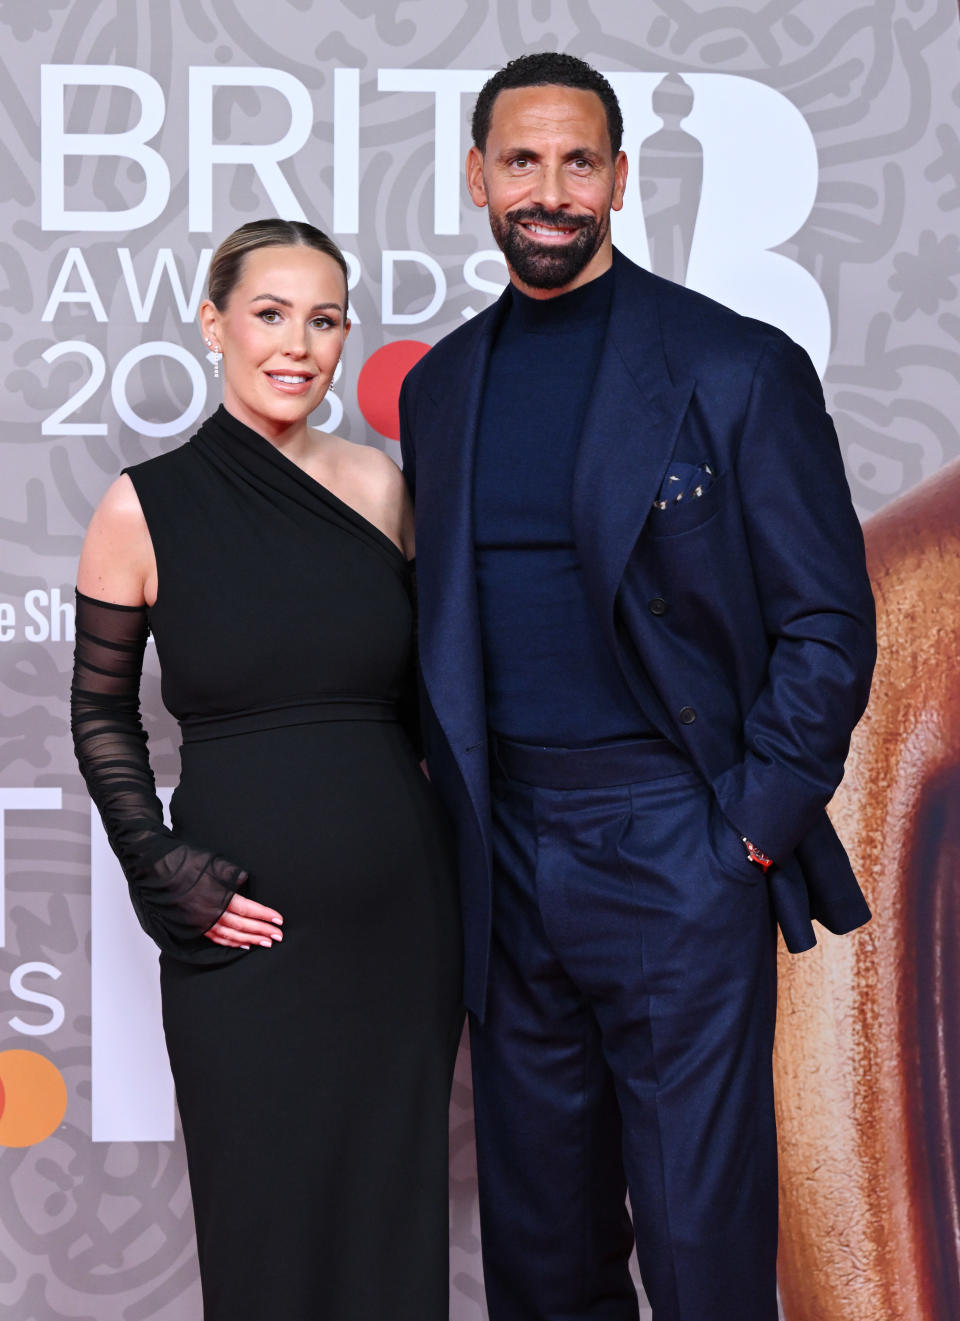 Kate Wright and Rio Ferdinand attend The BRIT Awards 2023 at The O2 Arena on February 11, 2023 in London, England. (Photo by Karwai Tang/WireImage)